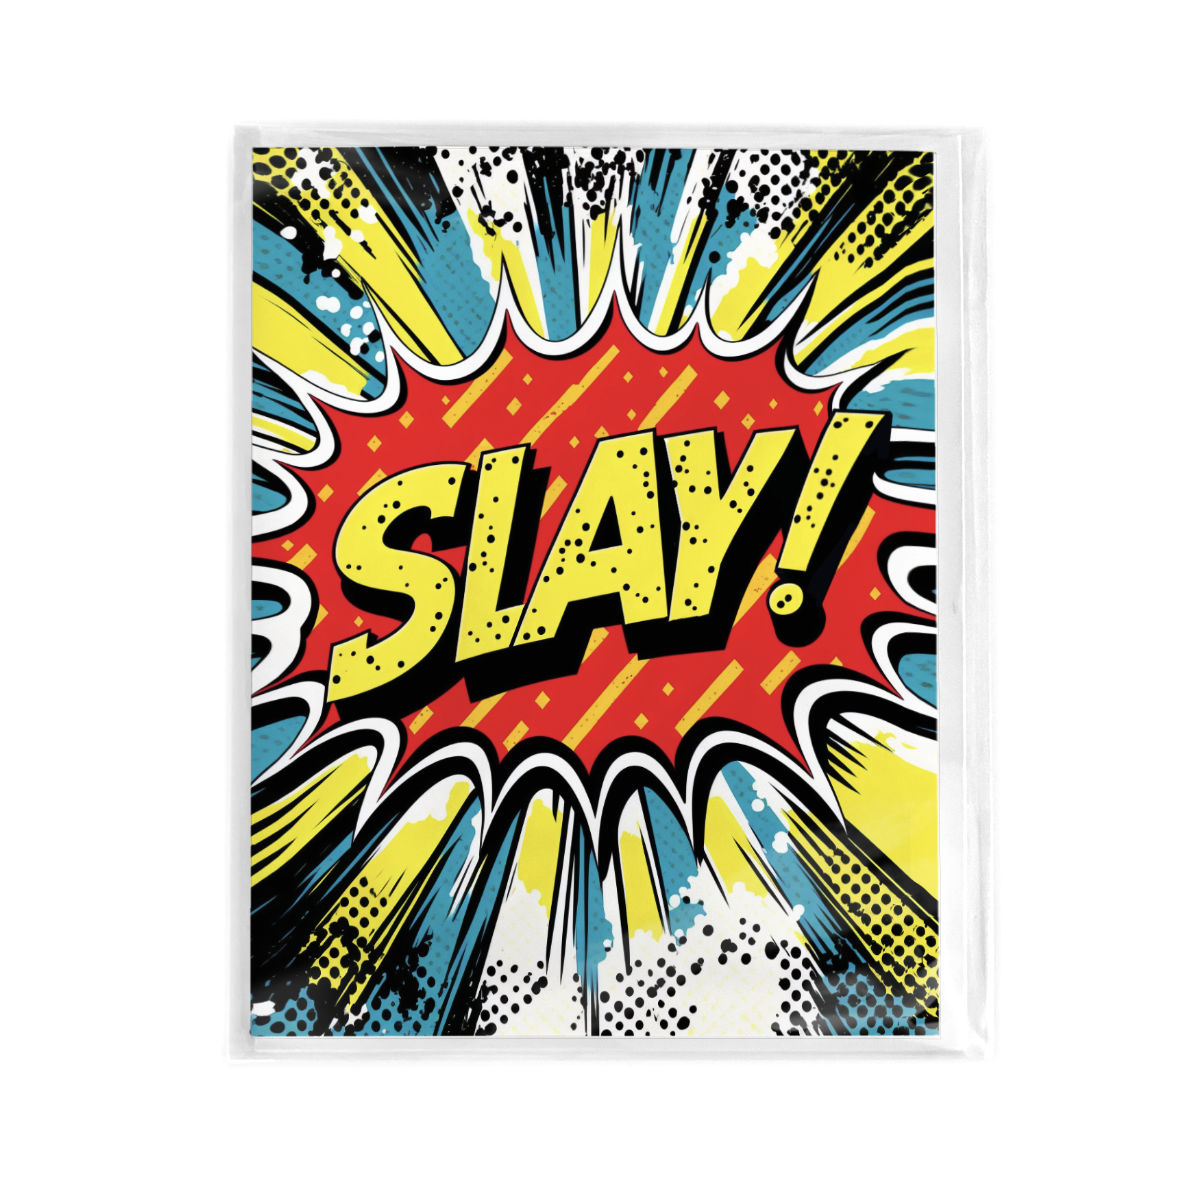 Slaying Definition Greeting Card for Sale by definingprints